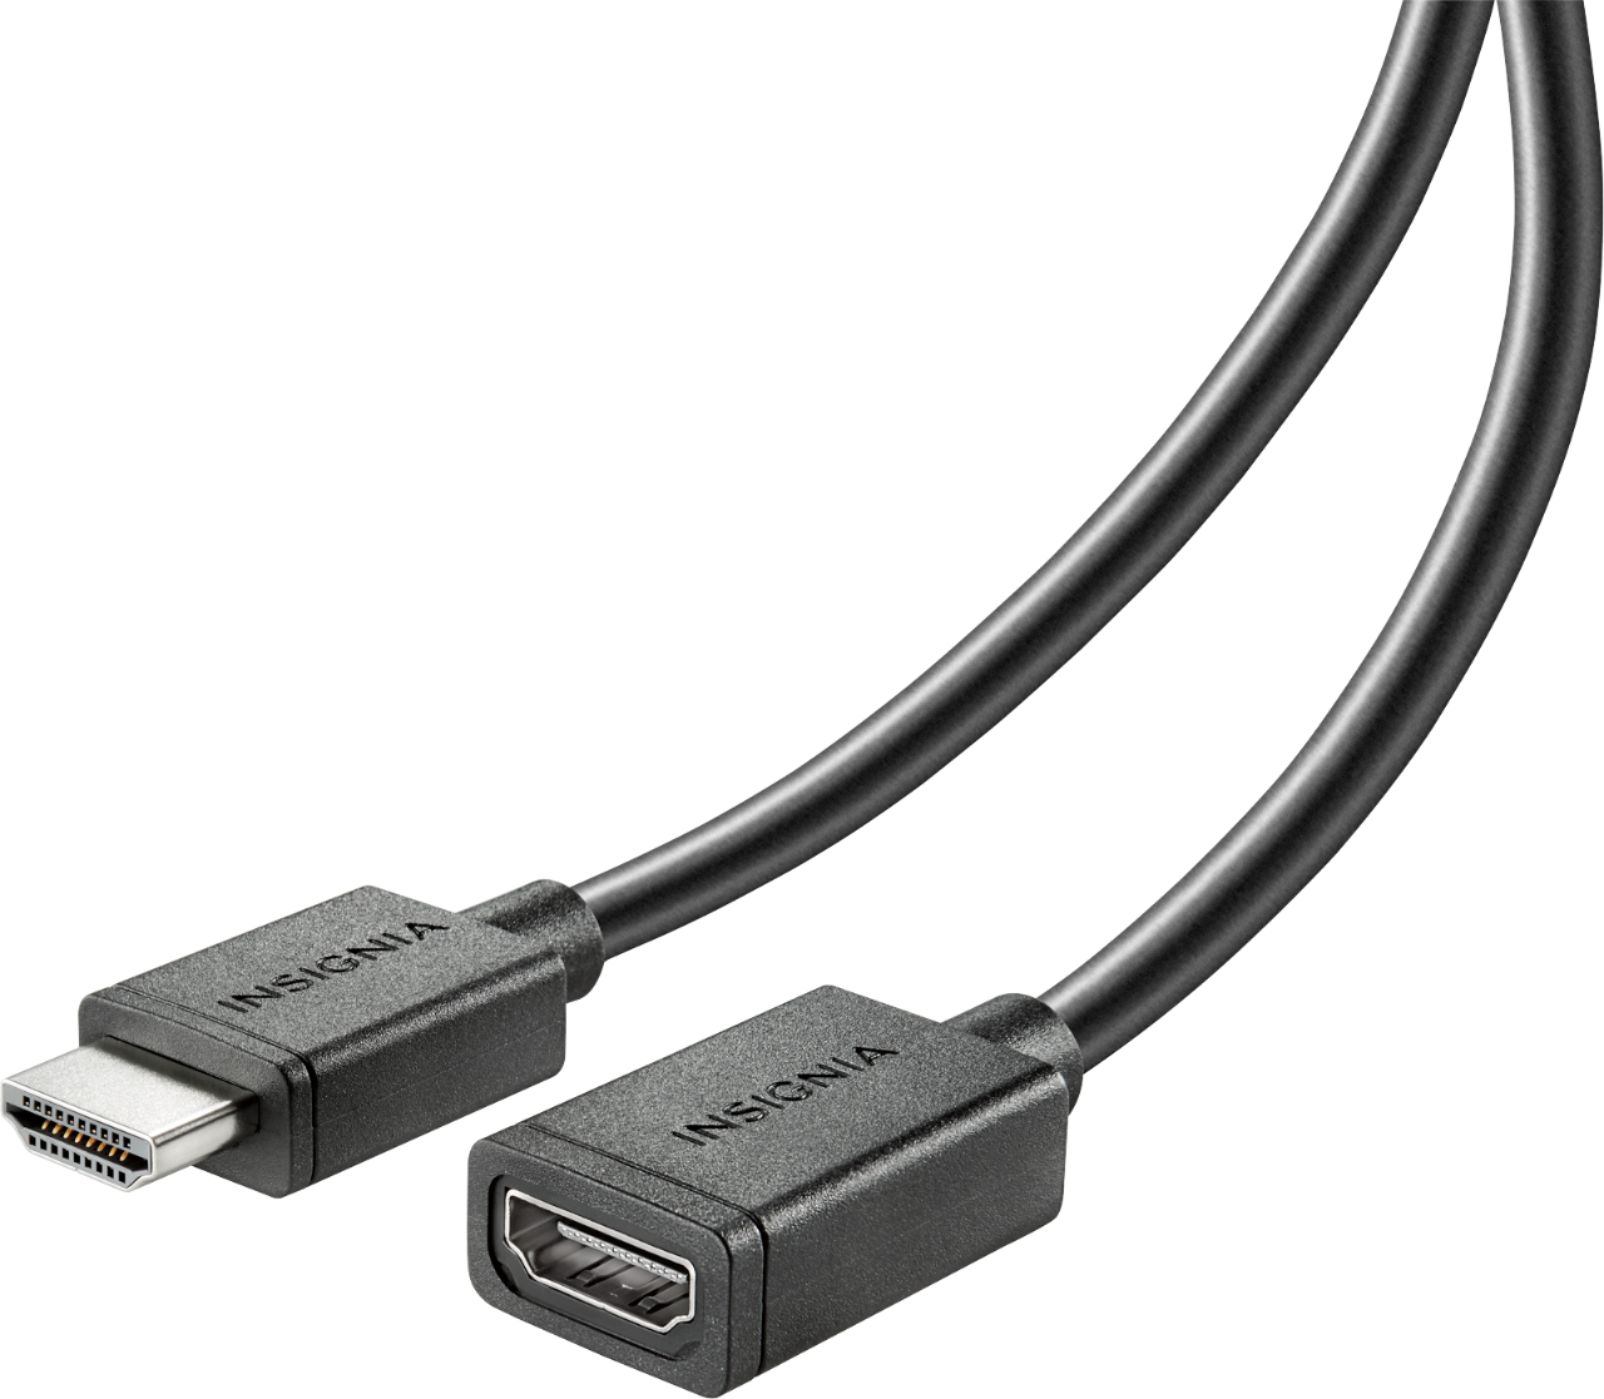 Insignia™ 3' HDMI Cable Extender Black NS-HZ3162 - Best Buy